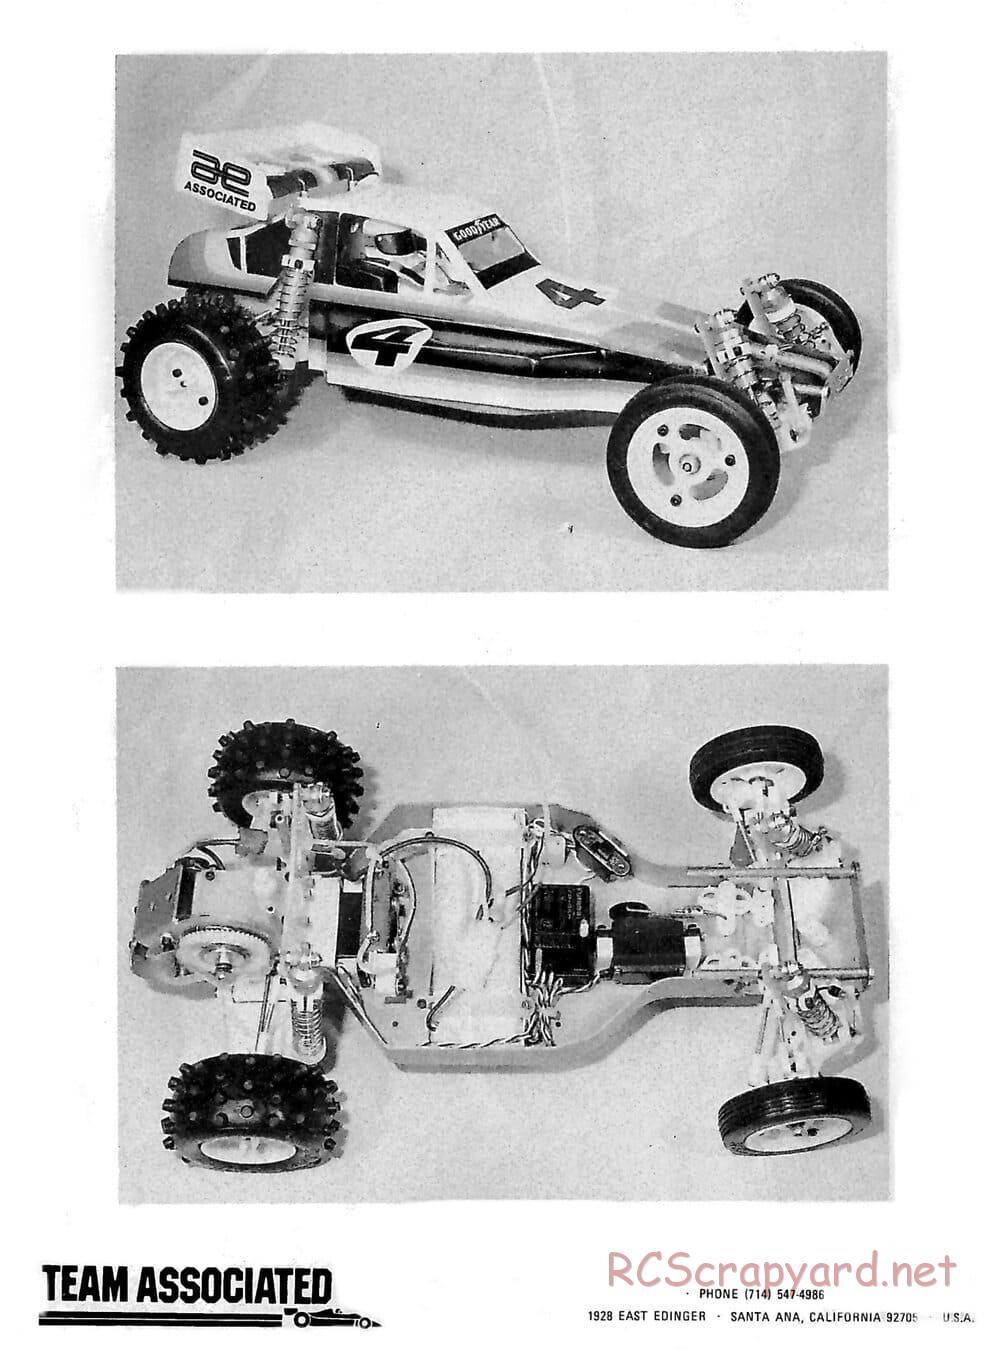 Team Associated - RC10 1984 - Manual - Page 2